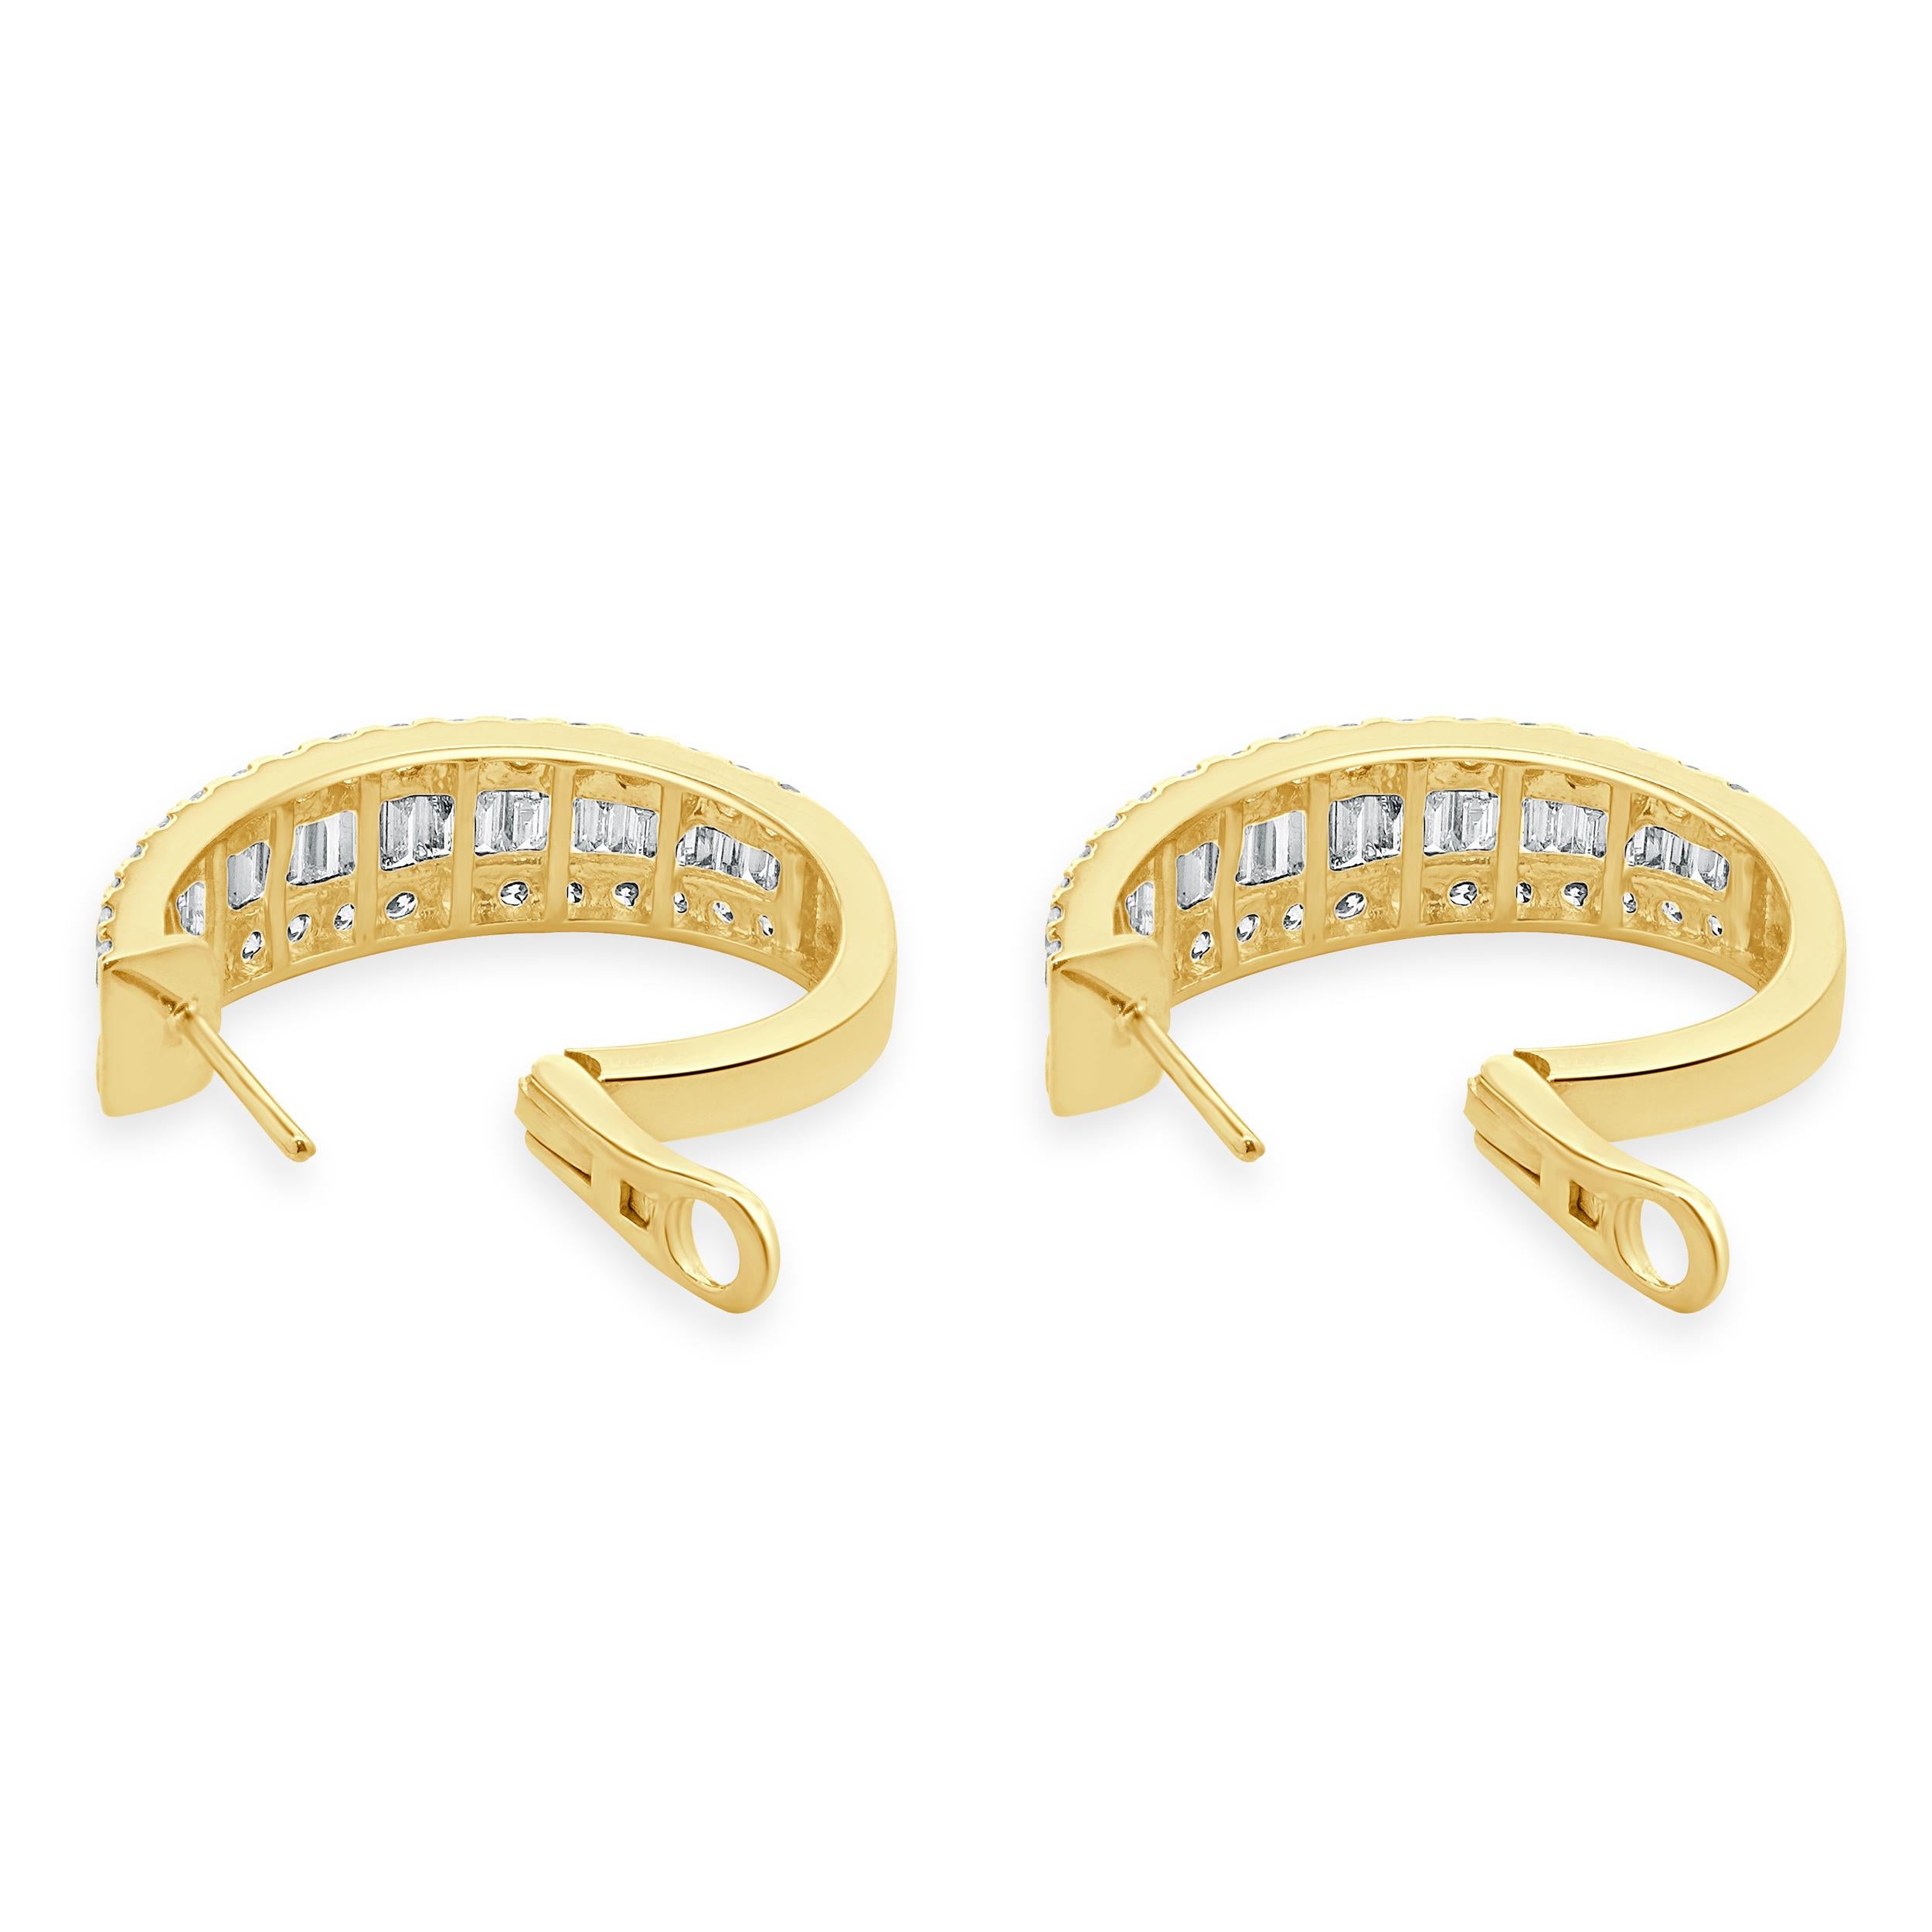 18 Karat Yellow Gold 30MM Round and Baguette Diamond Hoop Earrings In Excellent Condition For Sale In Scottsdale, AZ